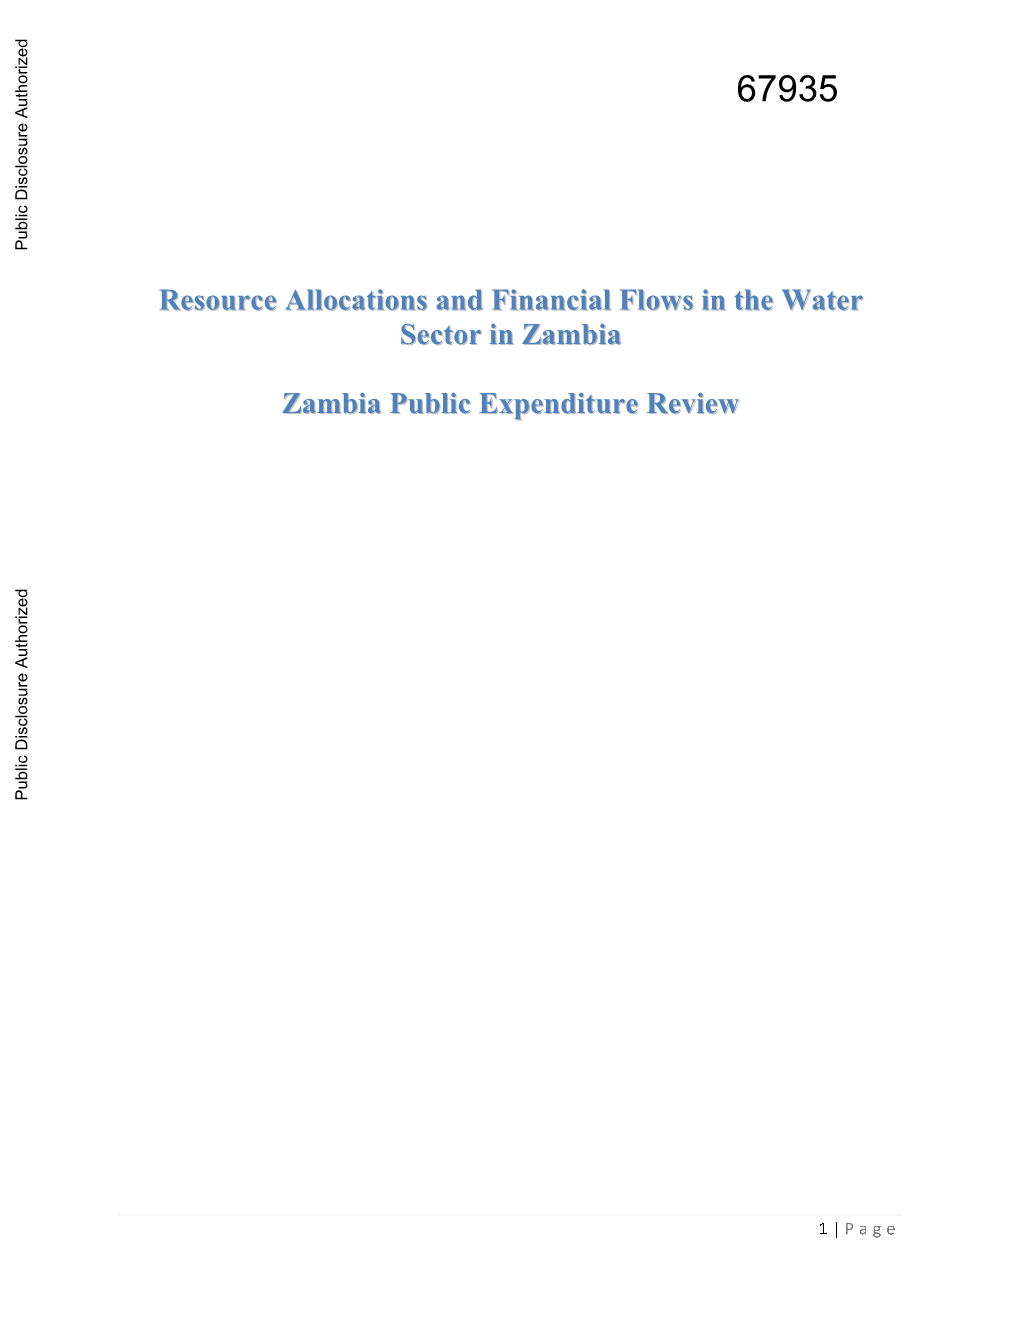 Resource Allocations and Financial Flows in the Water Sector in Zambia